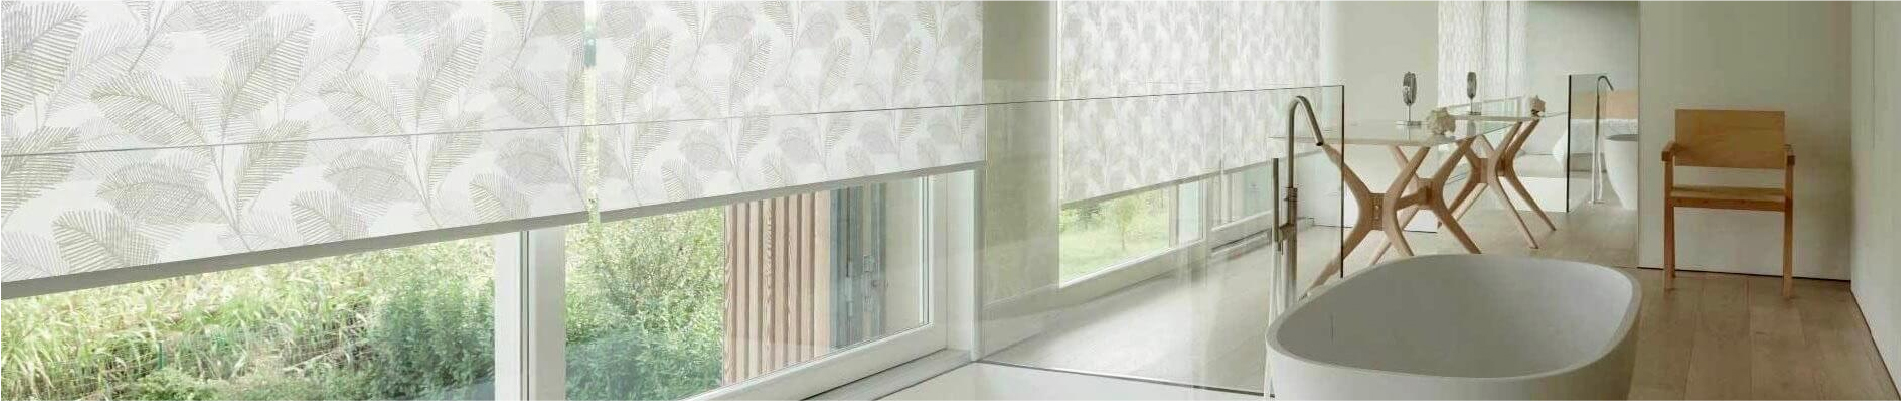 Roller Shades - Blinds Town